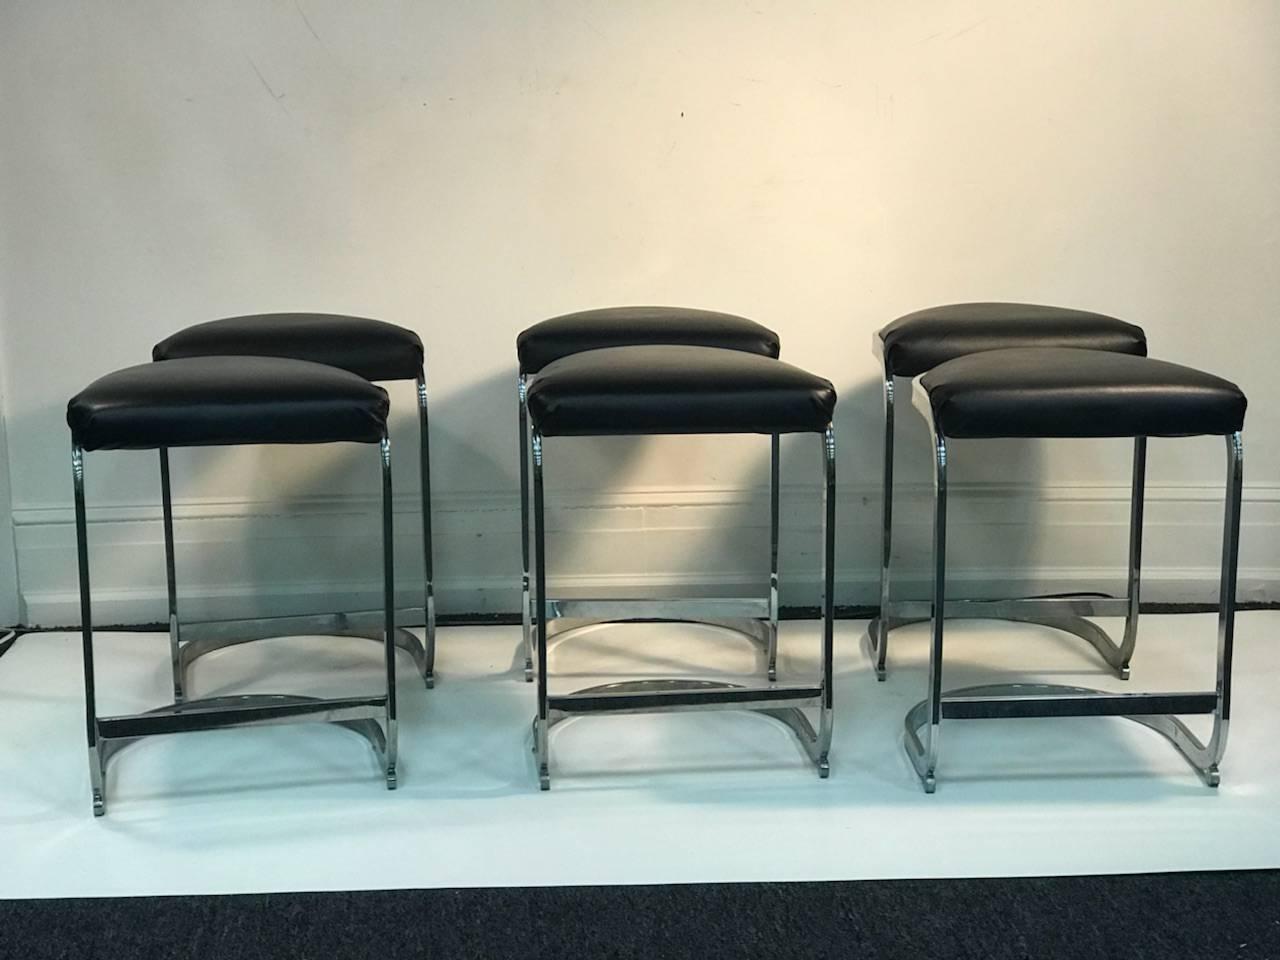 Set of six black leatherette and chrome stools with demilune seat and base. Substantial curving chrome frame.
These stools were designed in the 1970s-1980s and atrributed to Milo Baughman for DIA.